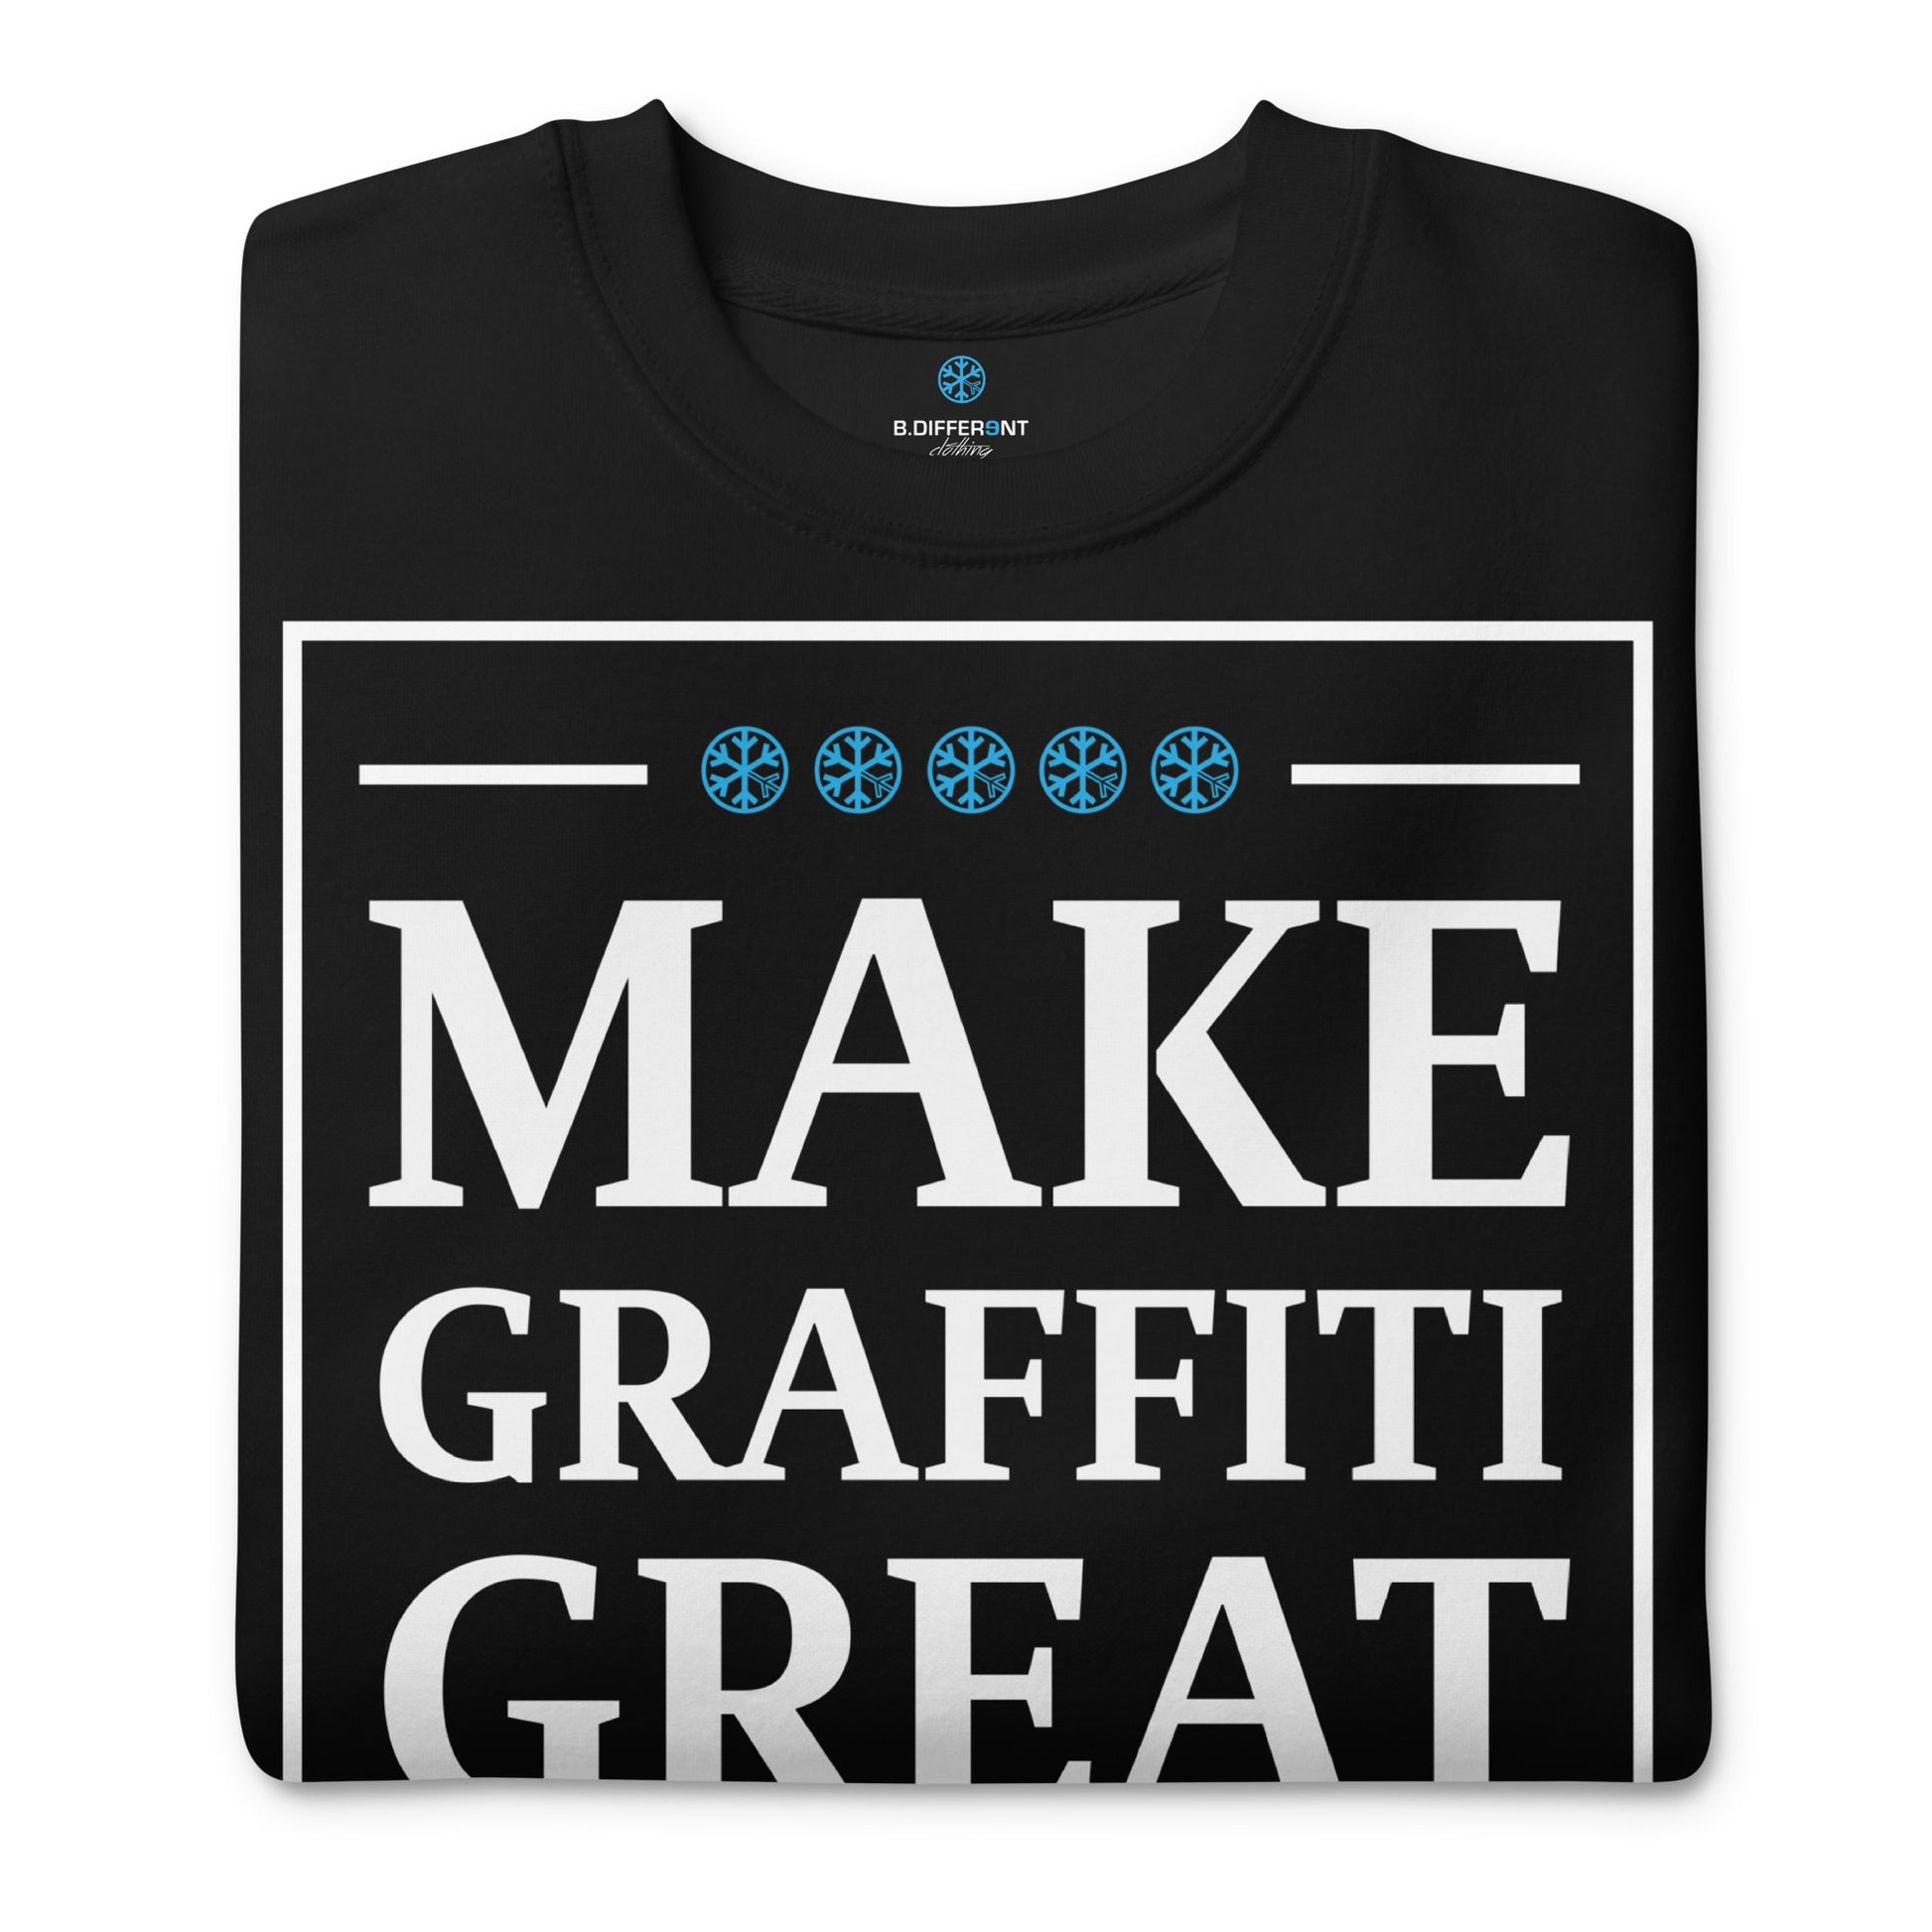 folded make graffiti great again sweatshirt by b.different clothing graffiti and street art inspired streetwear brand for weirdos, misfits, and outcasts.